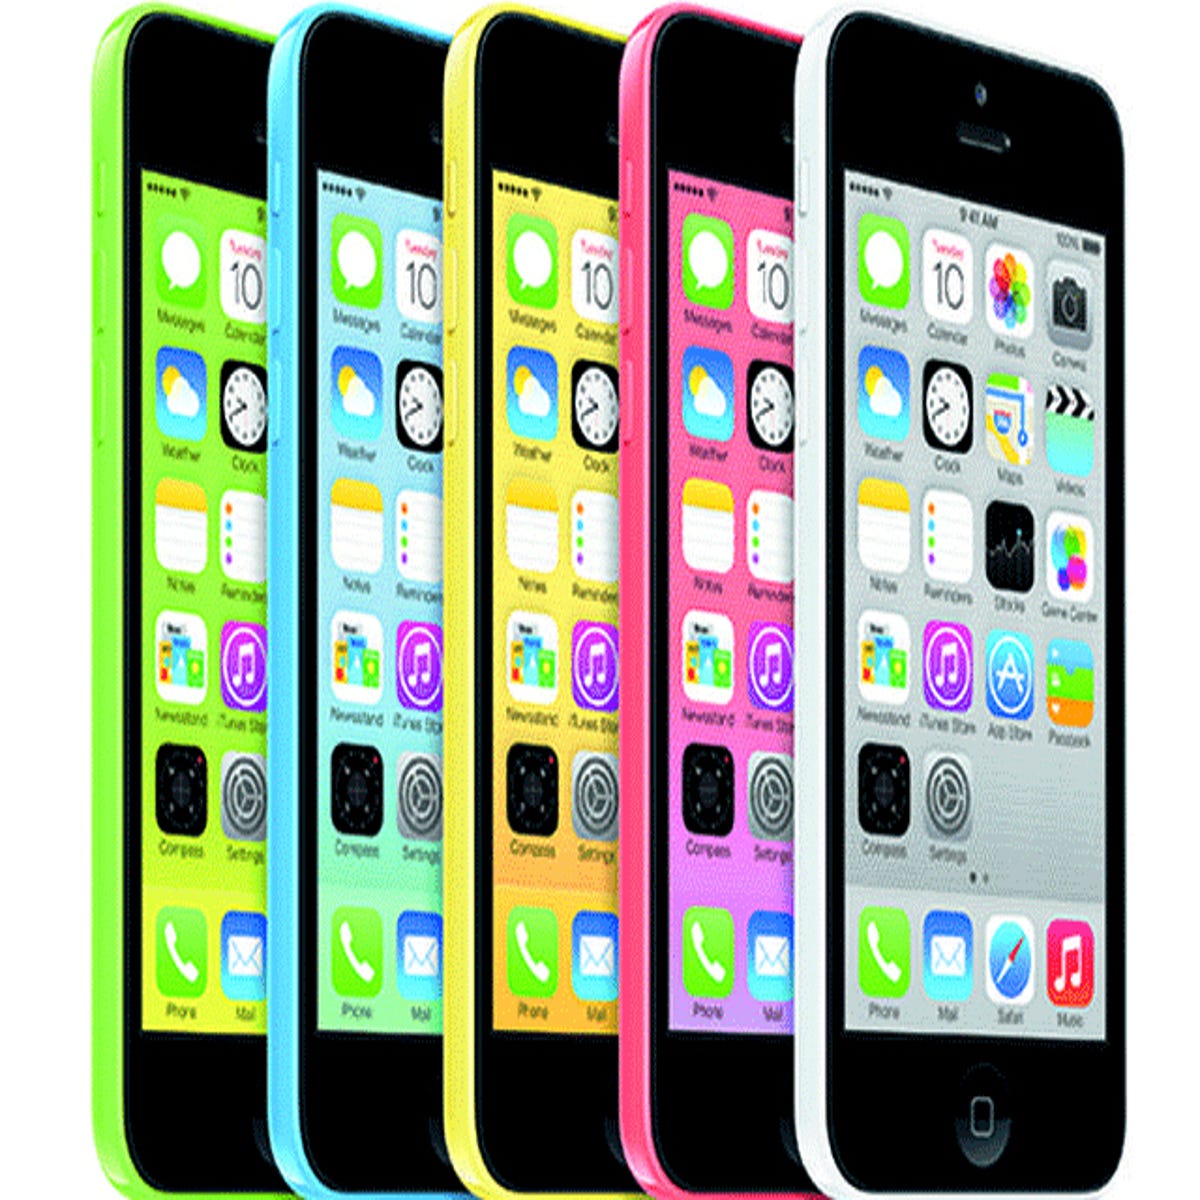 Apple iPhone review: A colourful iPhone 5 with better life | ZDNet